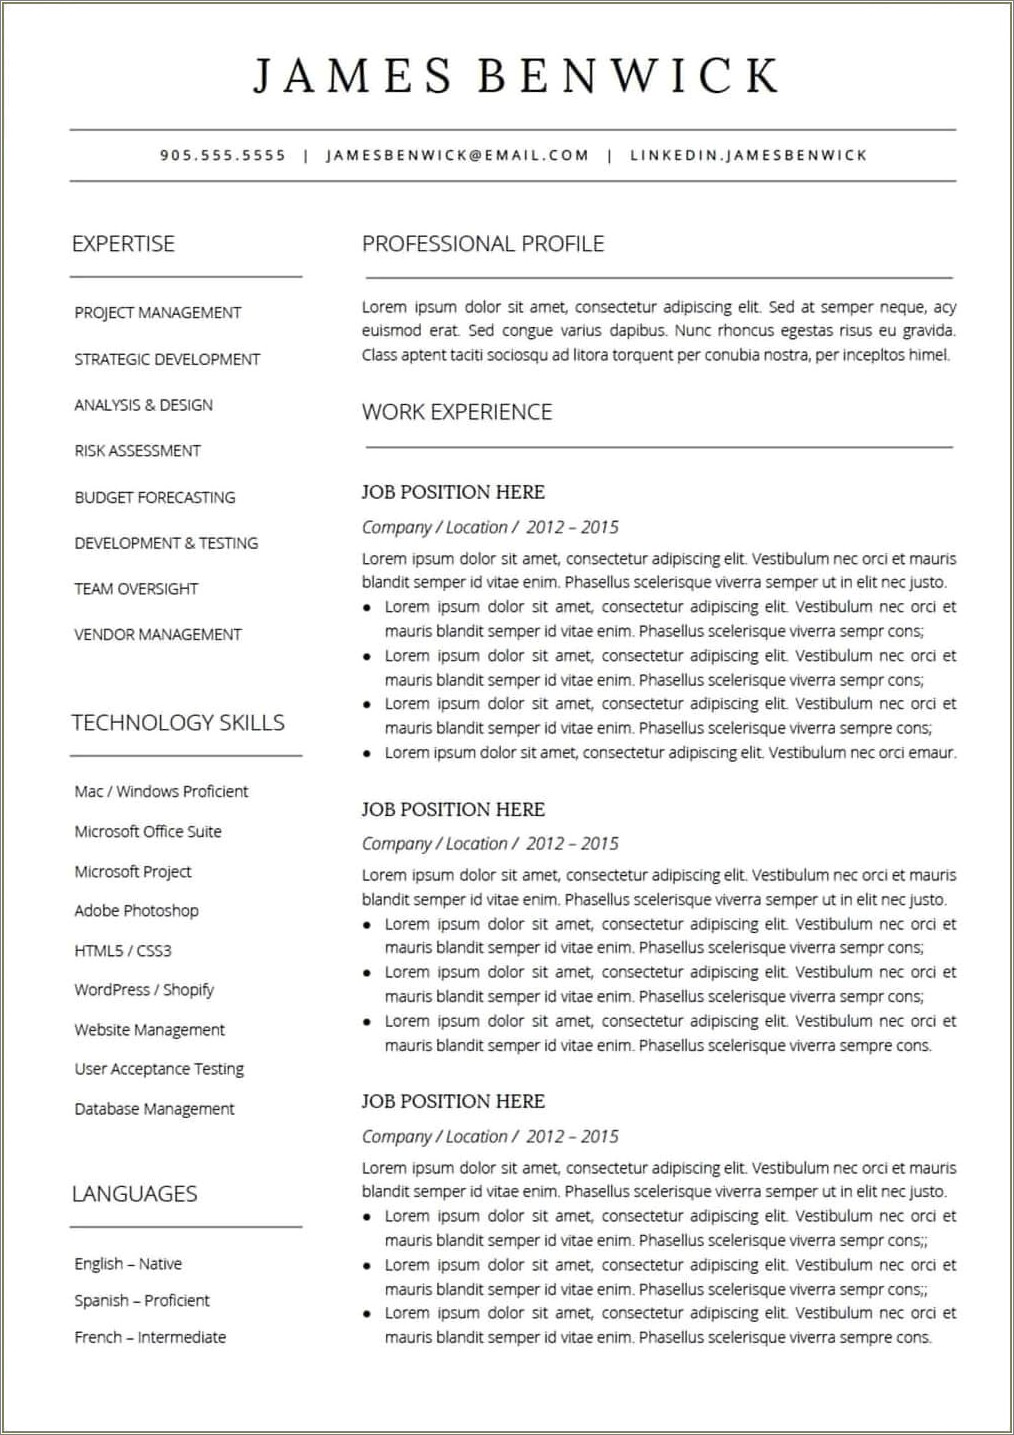 Resume Templates To Work At Google